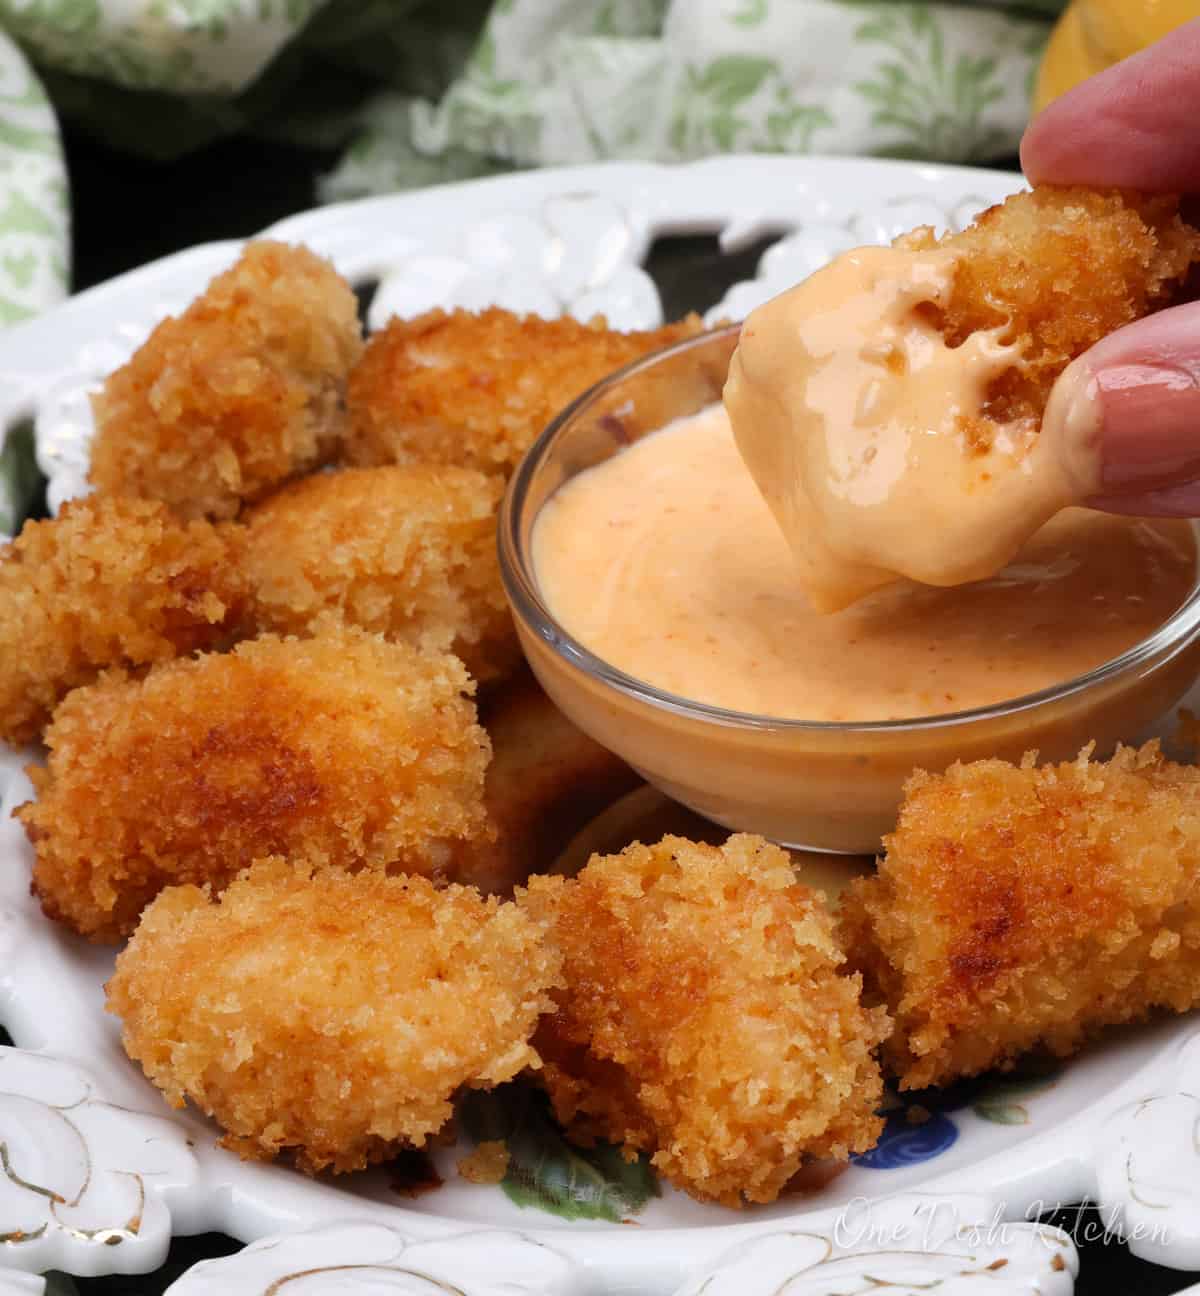 a chicken nugget in dipping sauce next to a plate with other chicken nuggets.